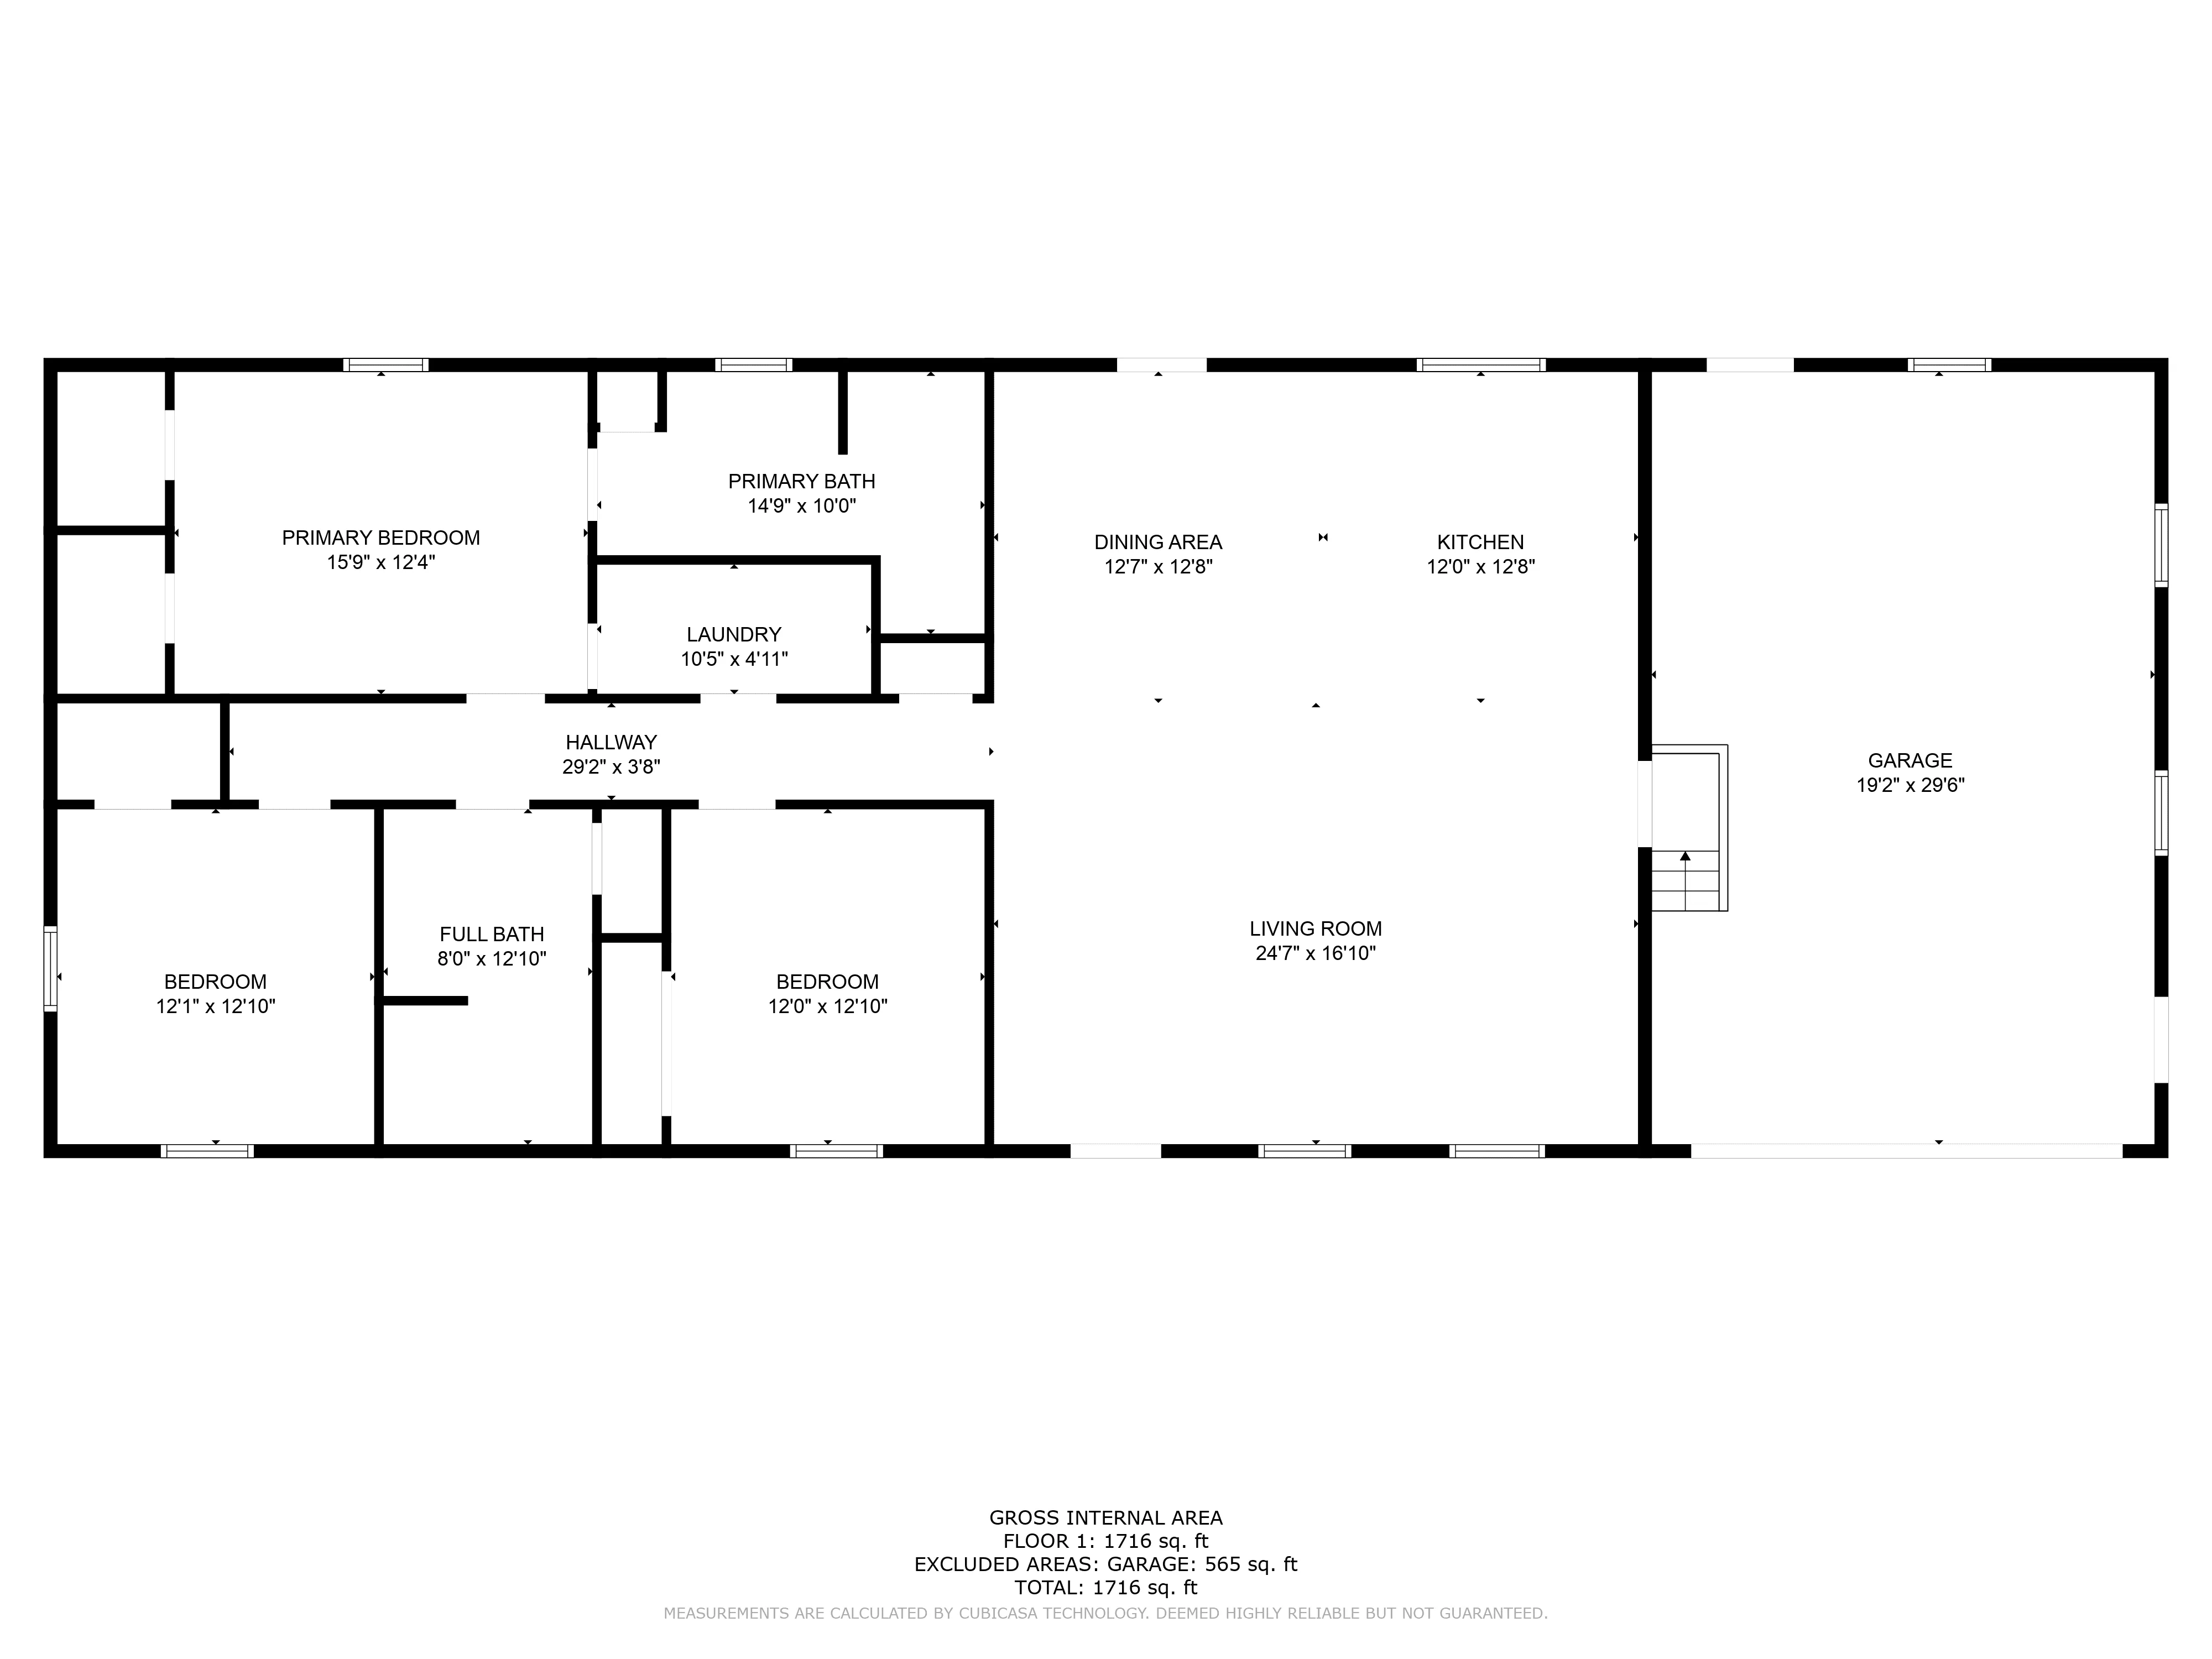 Floor plan of a residential property featuring labeled rooms with dimensions, including three bedrooms, two bathrooms, living room, kitchen, dining area, laundry, hallway, and attached garage.